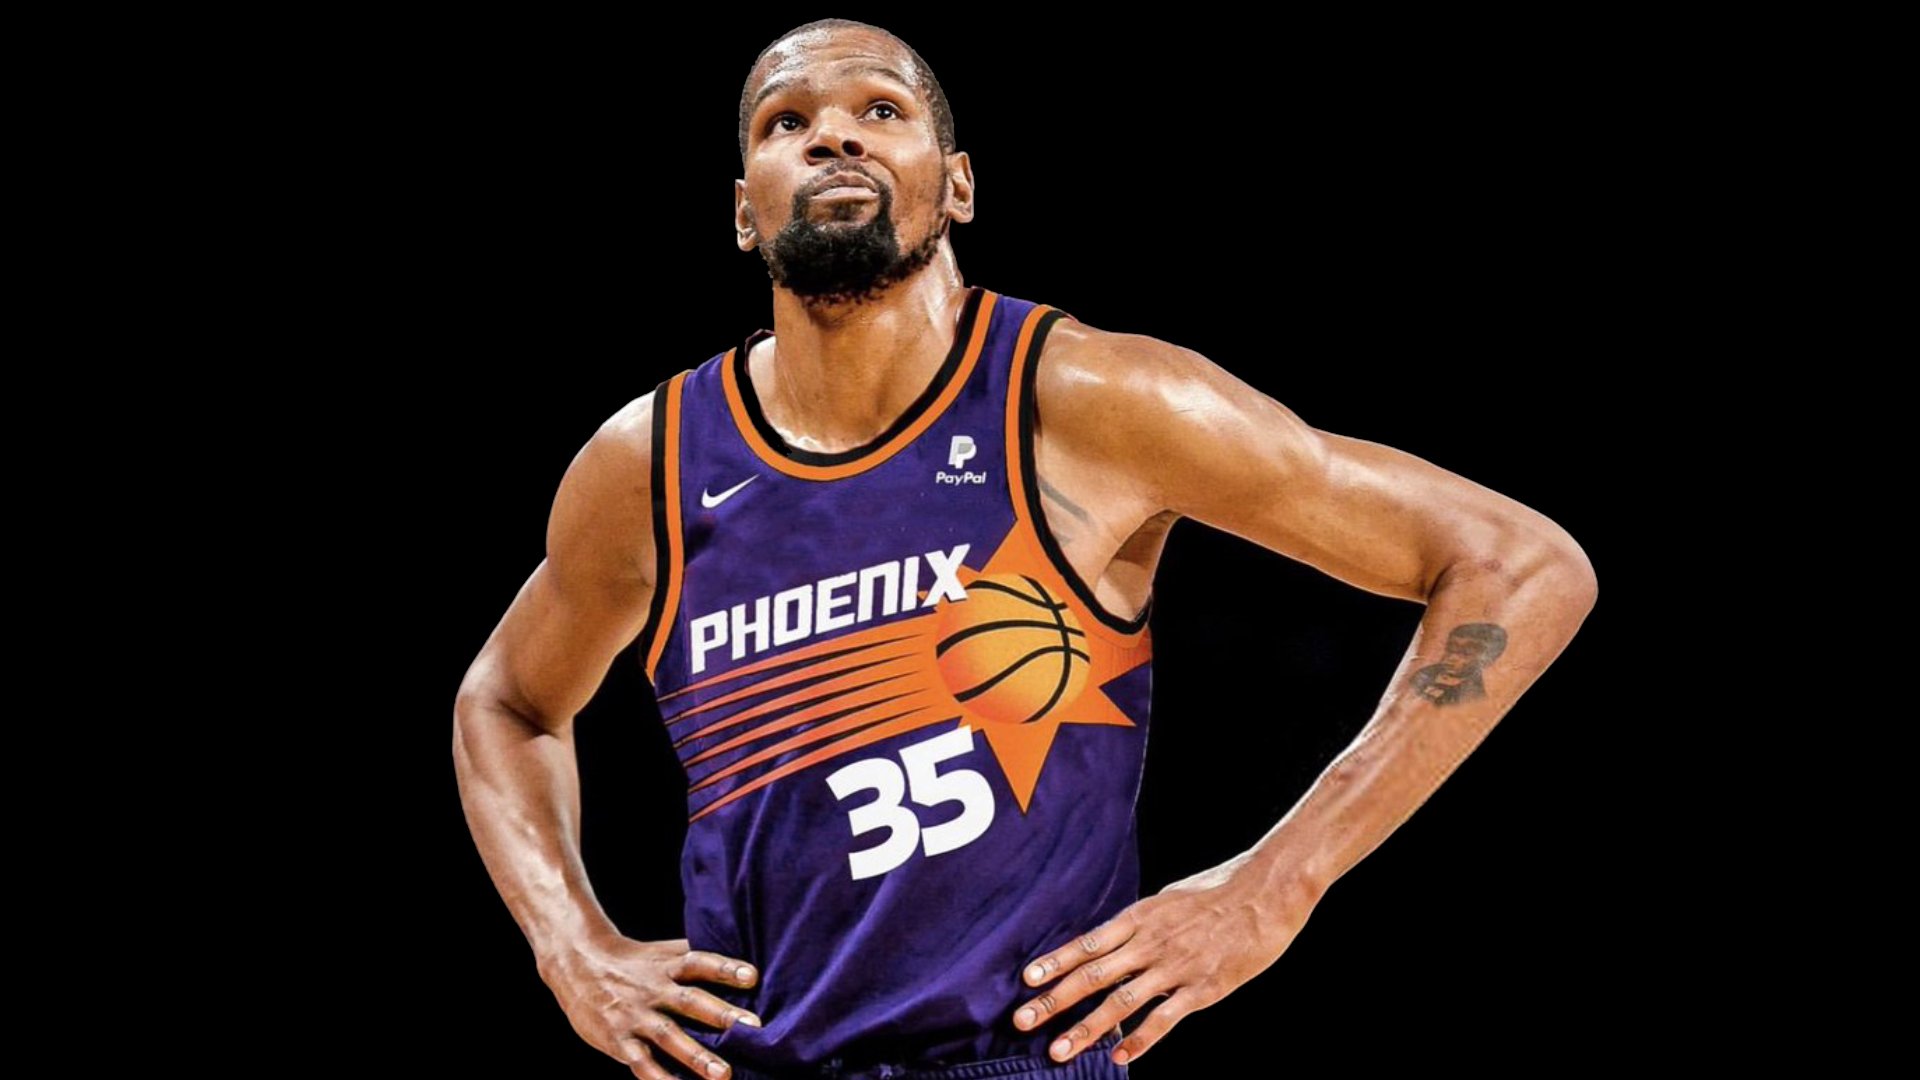 Kevin Durant WELCOME TO PHOENIX SUNS  Full Highlights vs Suns 271121   39 POINTS  1080P 60 FPS  YouTube